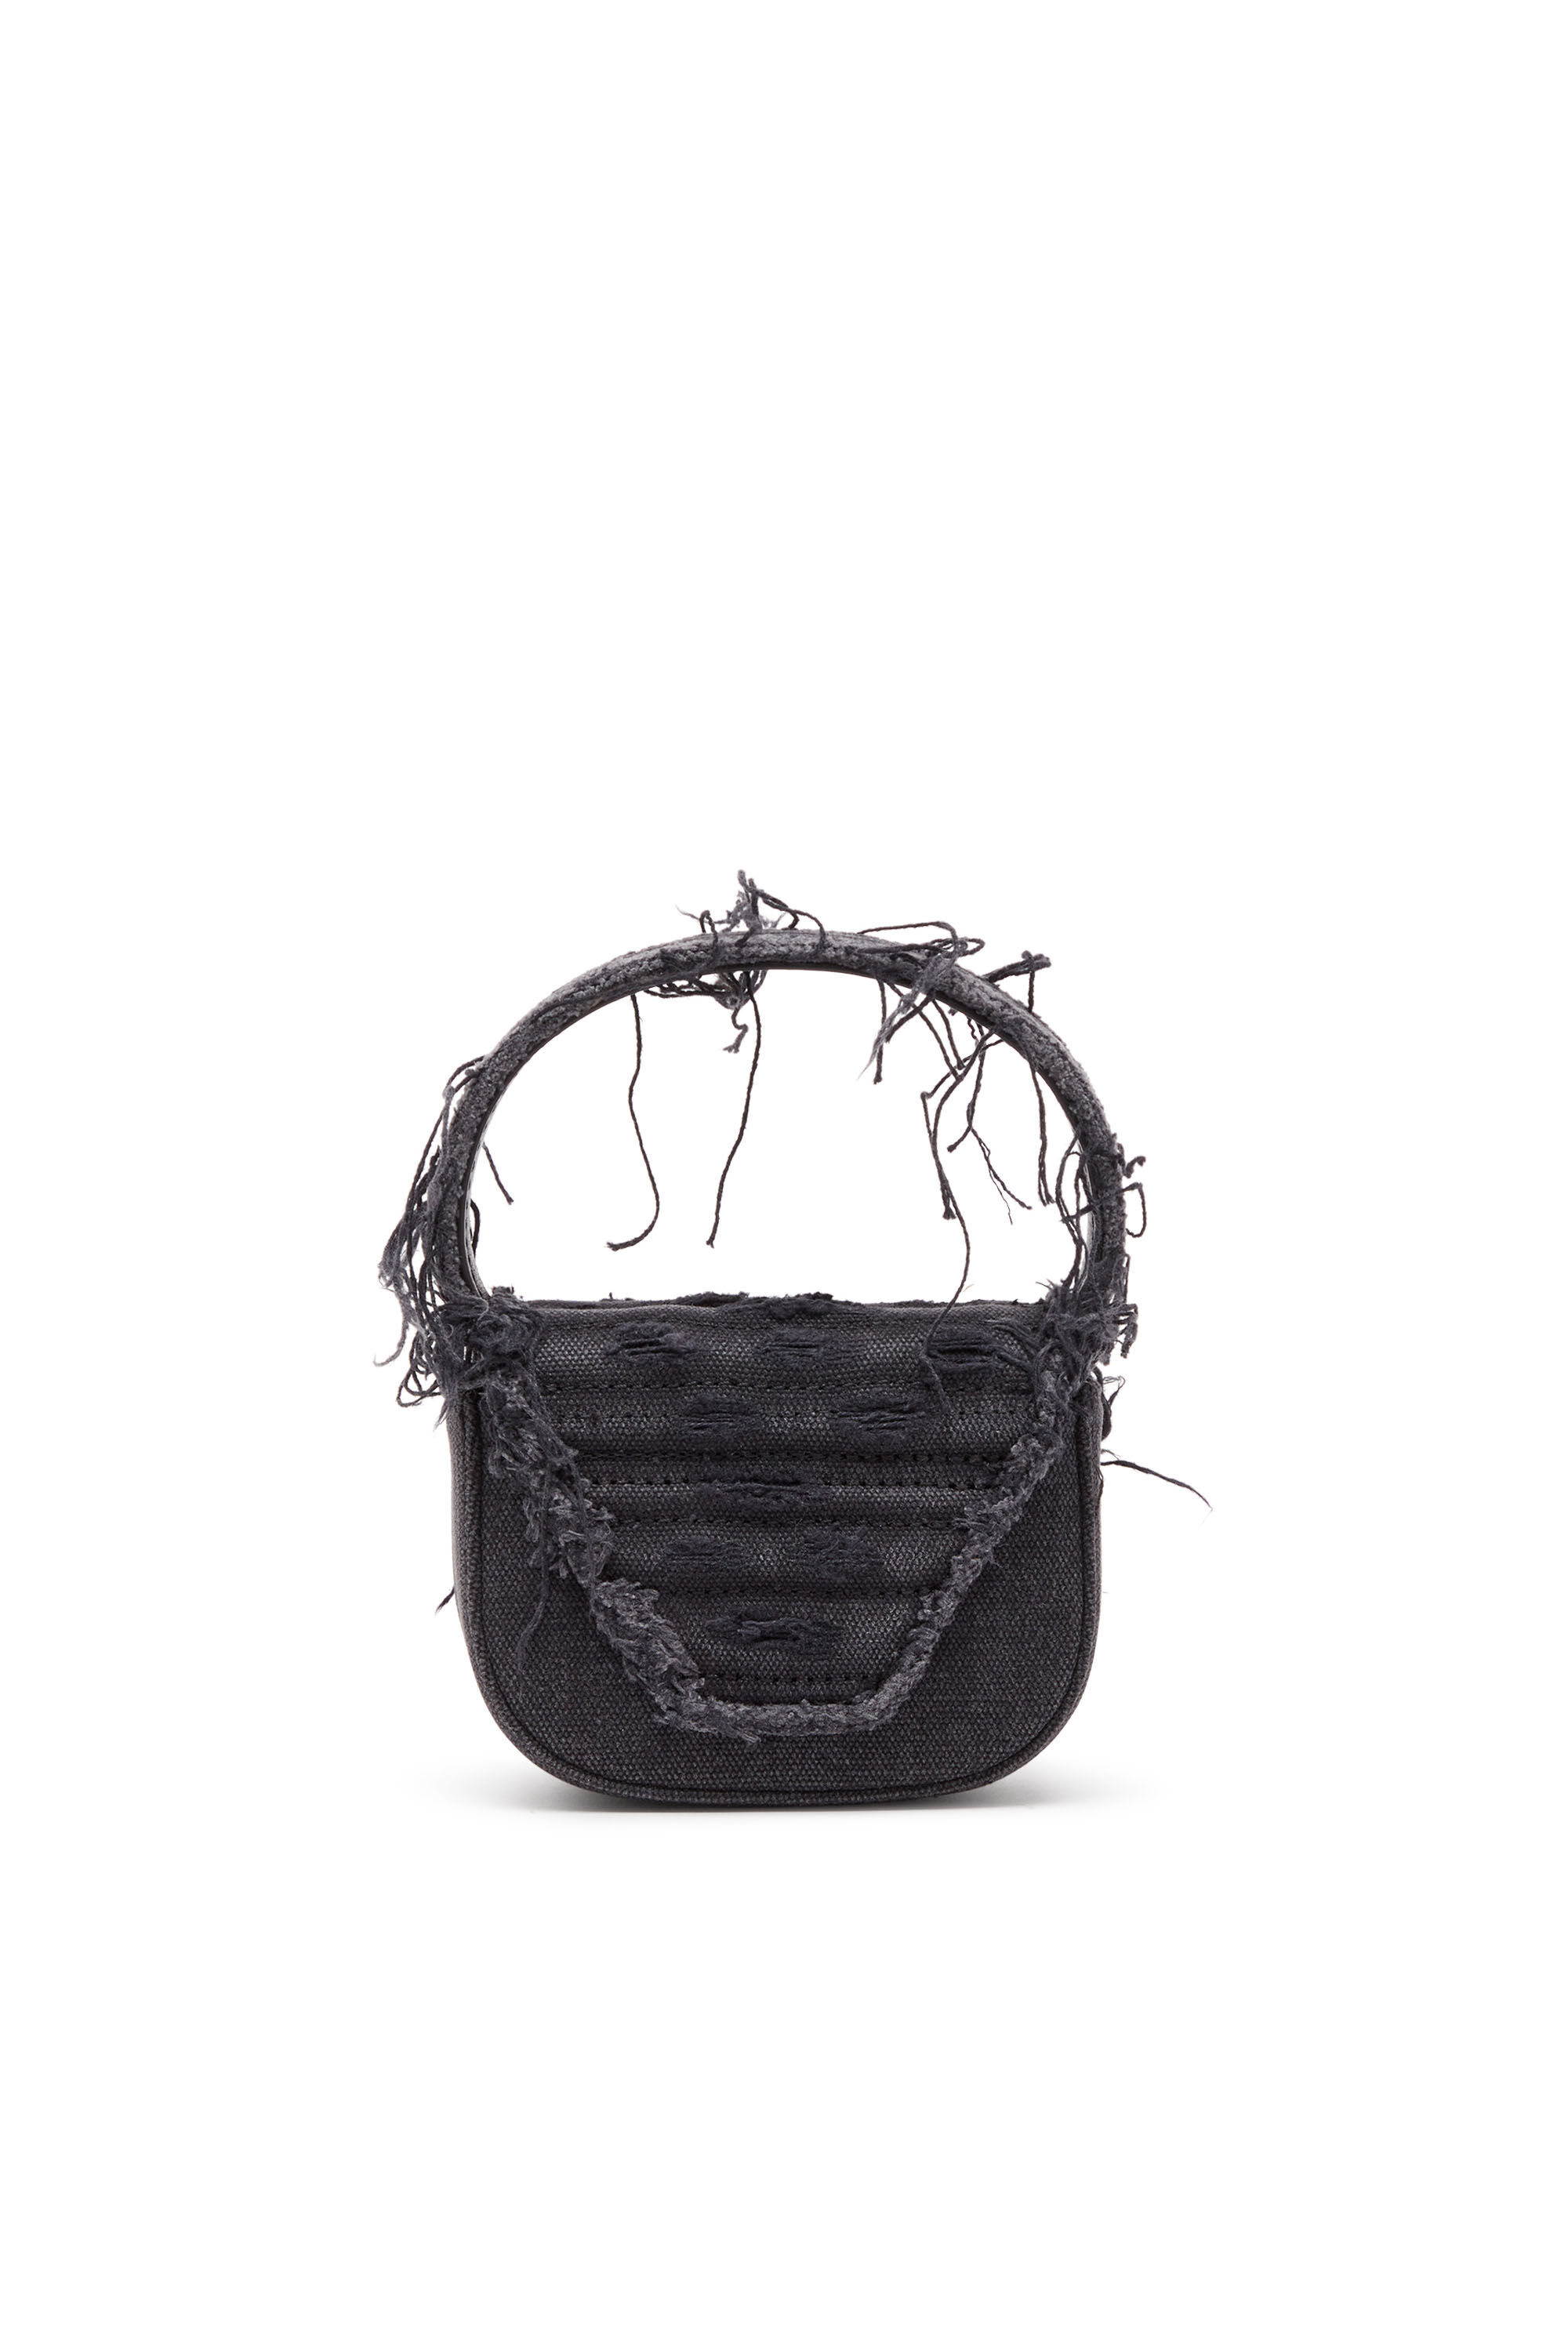 Diesel - 1DR XS, Woman 1DR XS-Iconic mini bag in canvas and leather in Black - Image 3